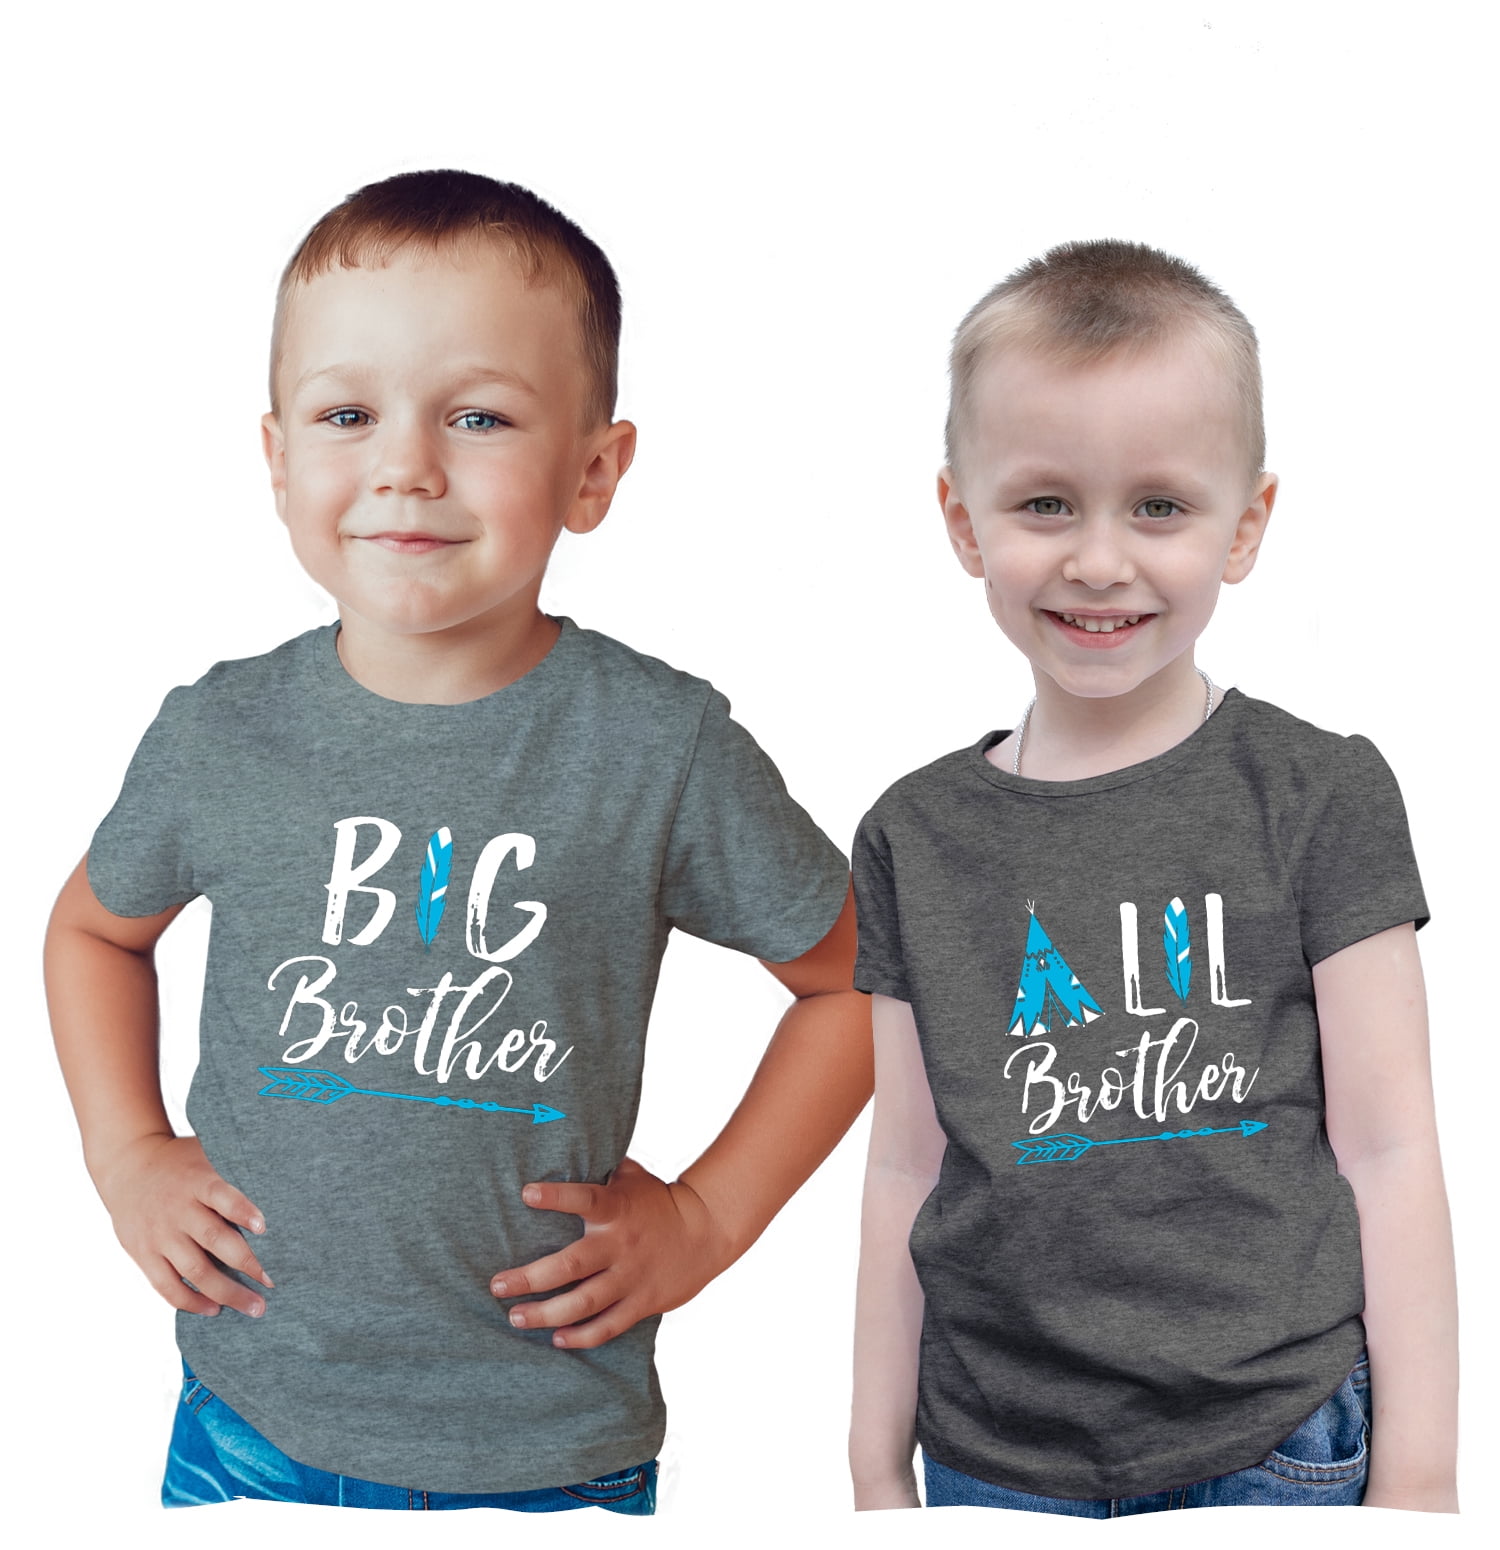 Hip Hop Twins Kids Toddler Baby Tshirt Brother Sister Sibling Friend Matching